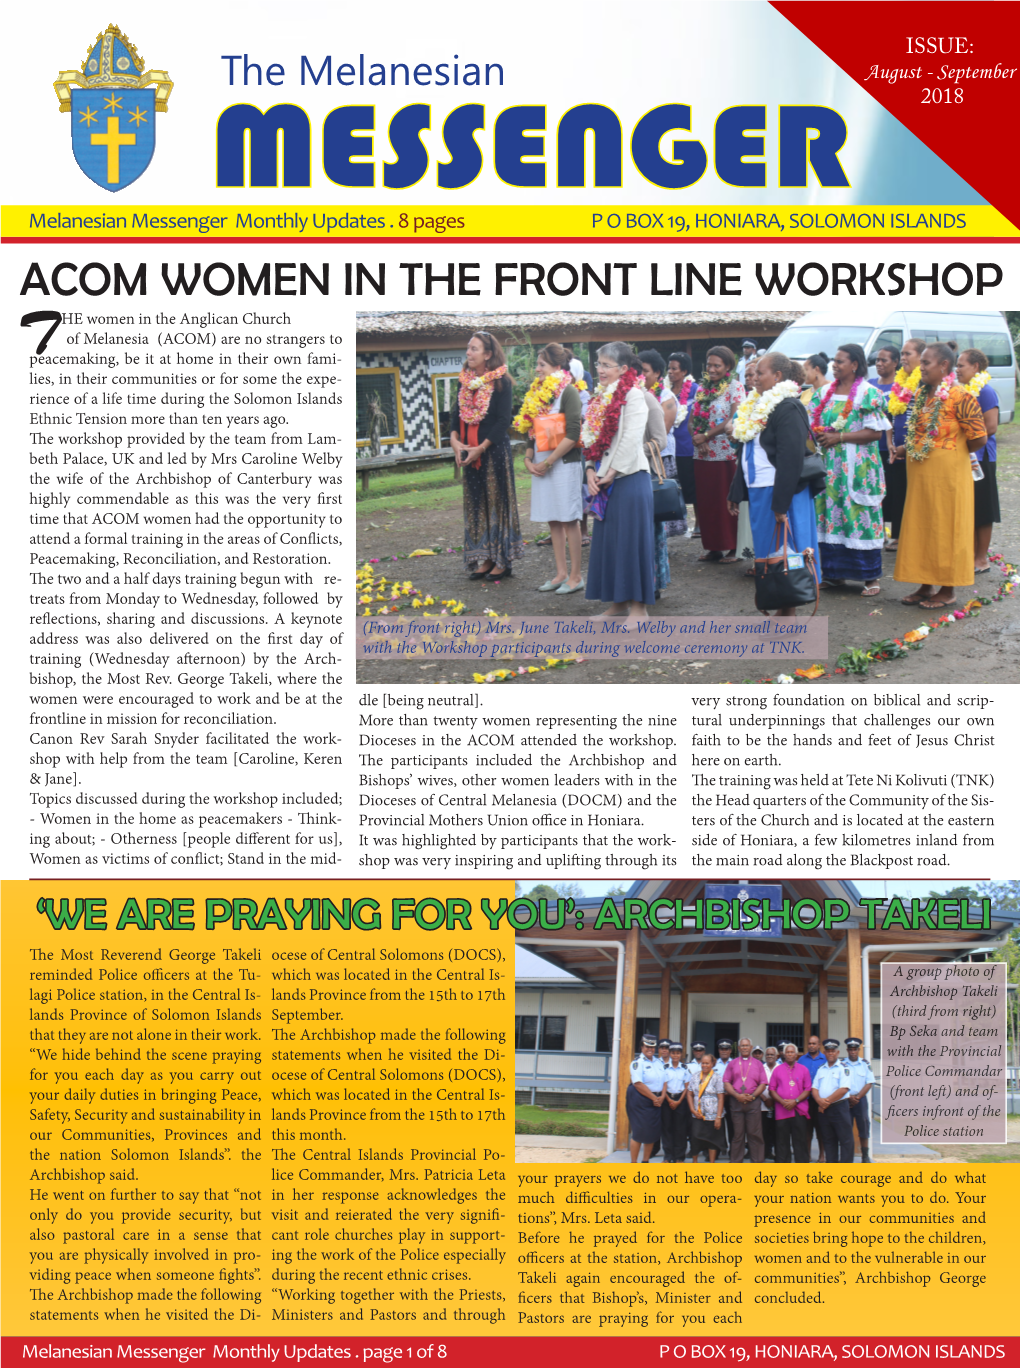 Acom Women in the Front Line Workshop